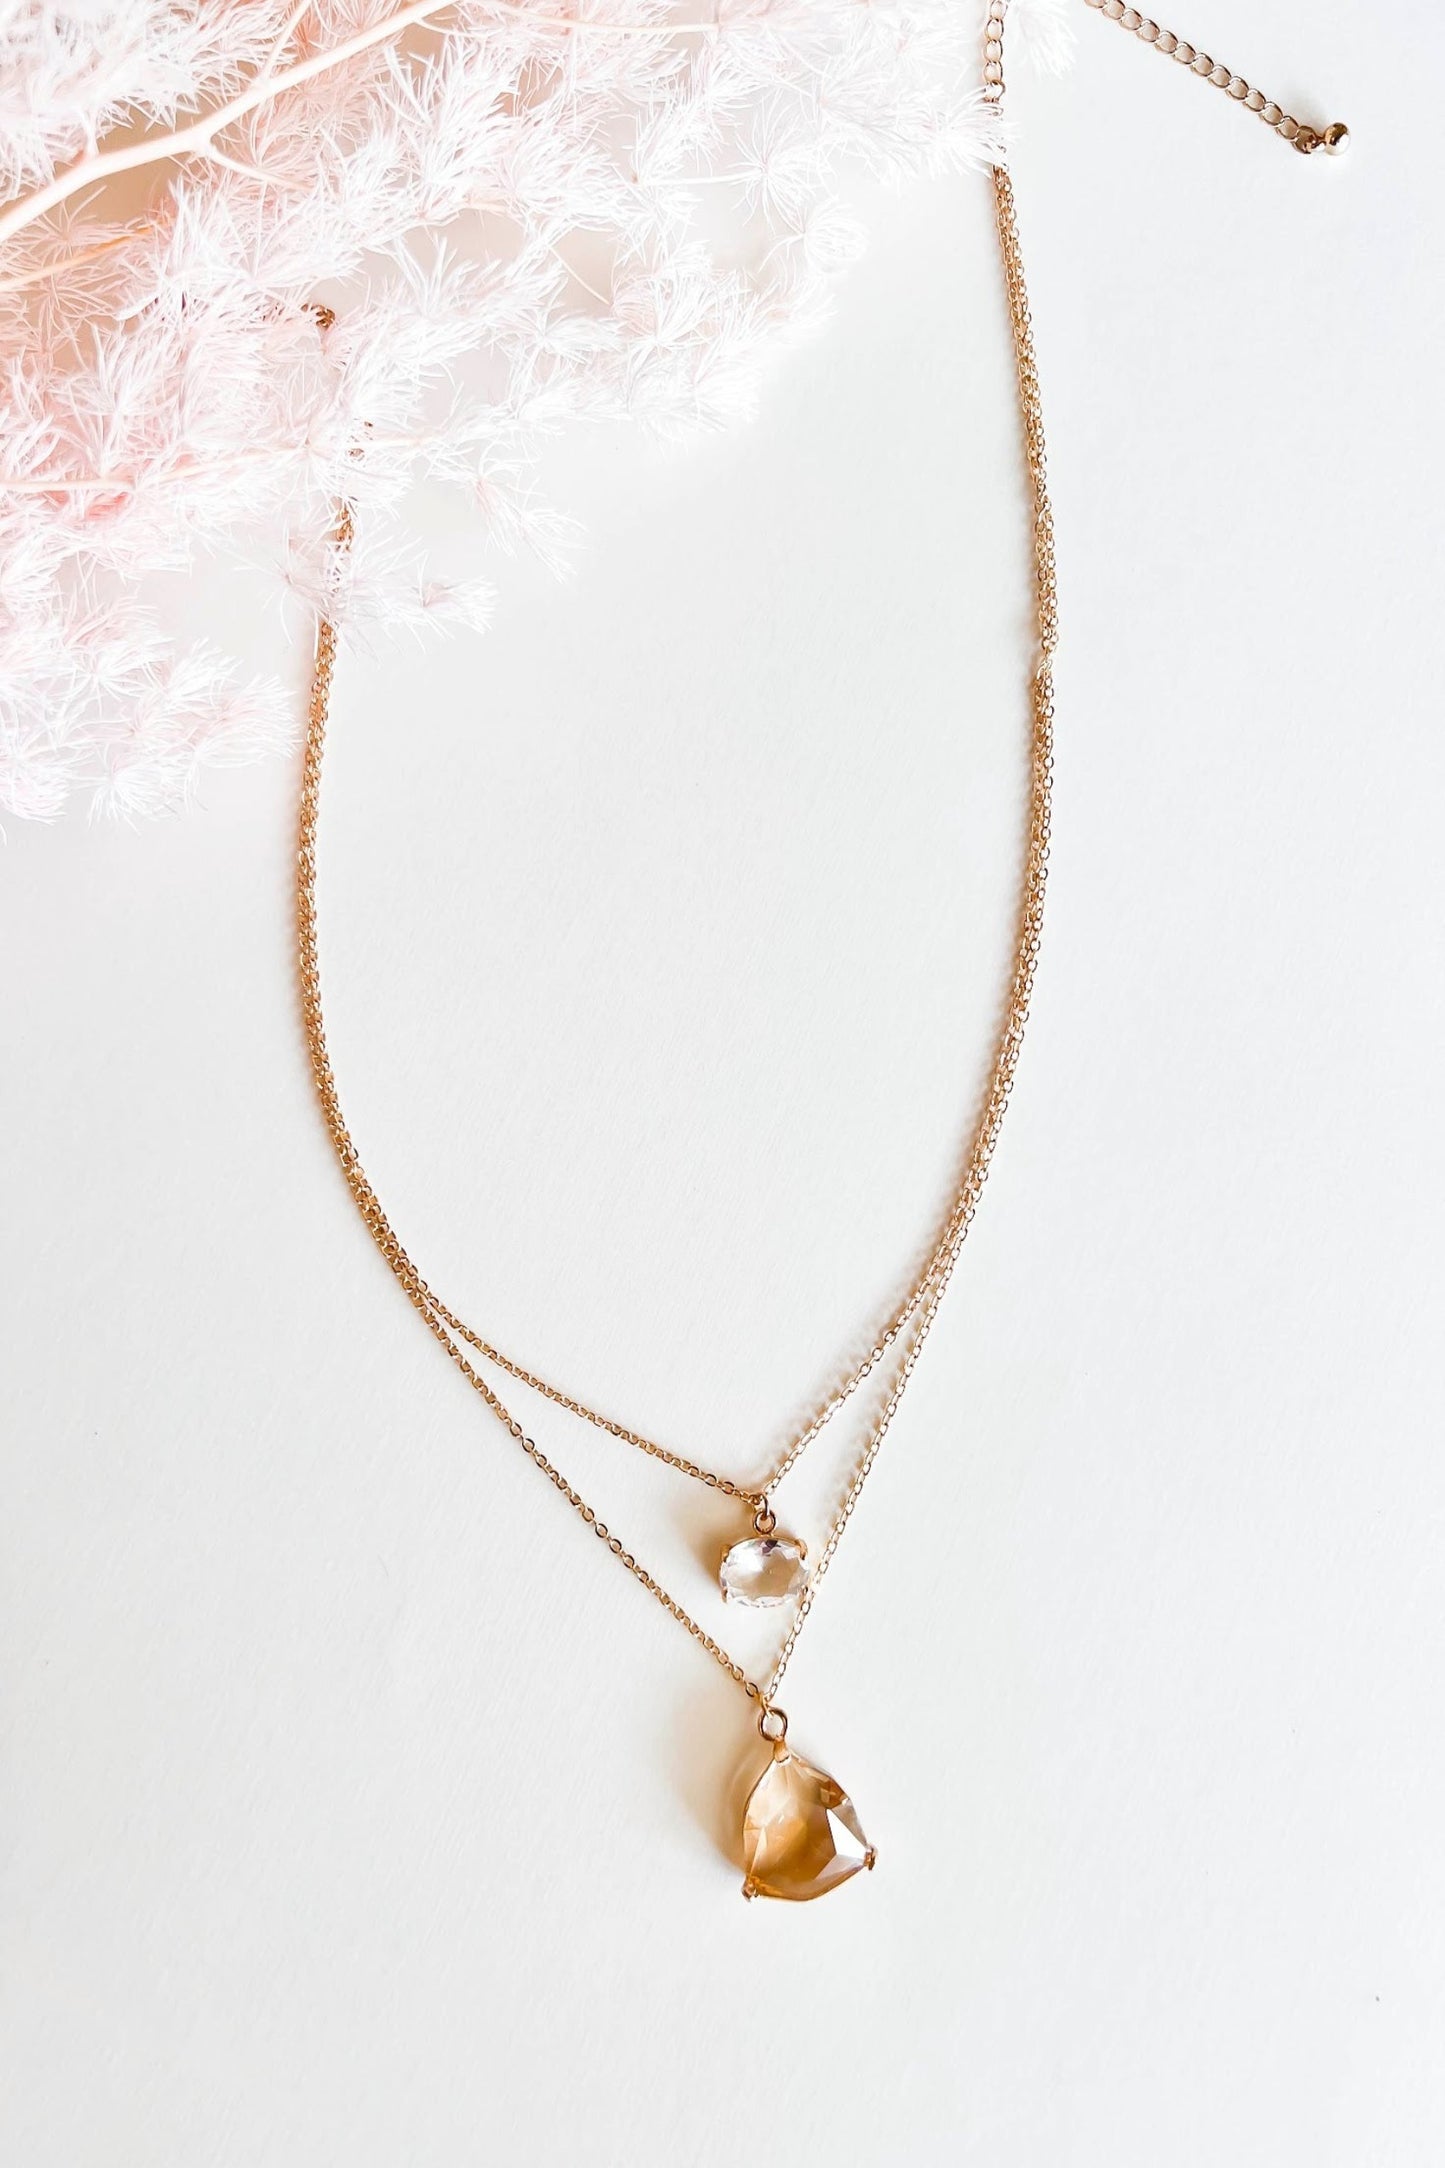 Claire Topaz Drop Necklace | Elegant Gemstone Necklace | Two Tiered Layering Pendant Necklace